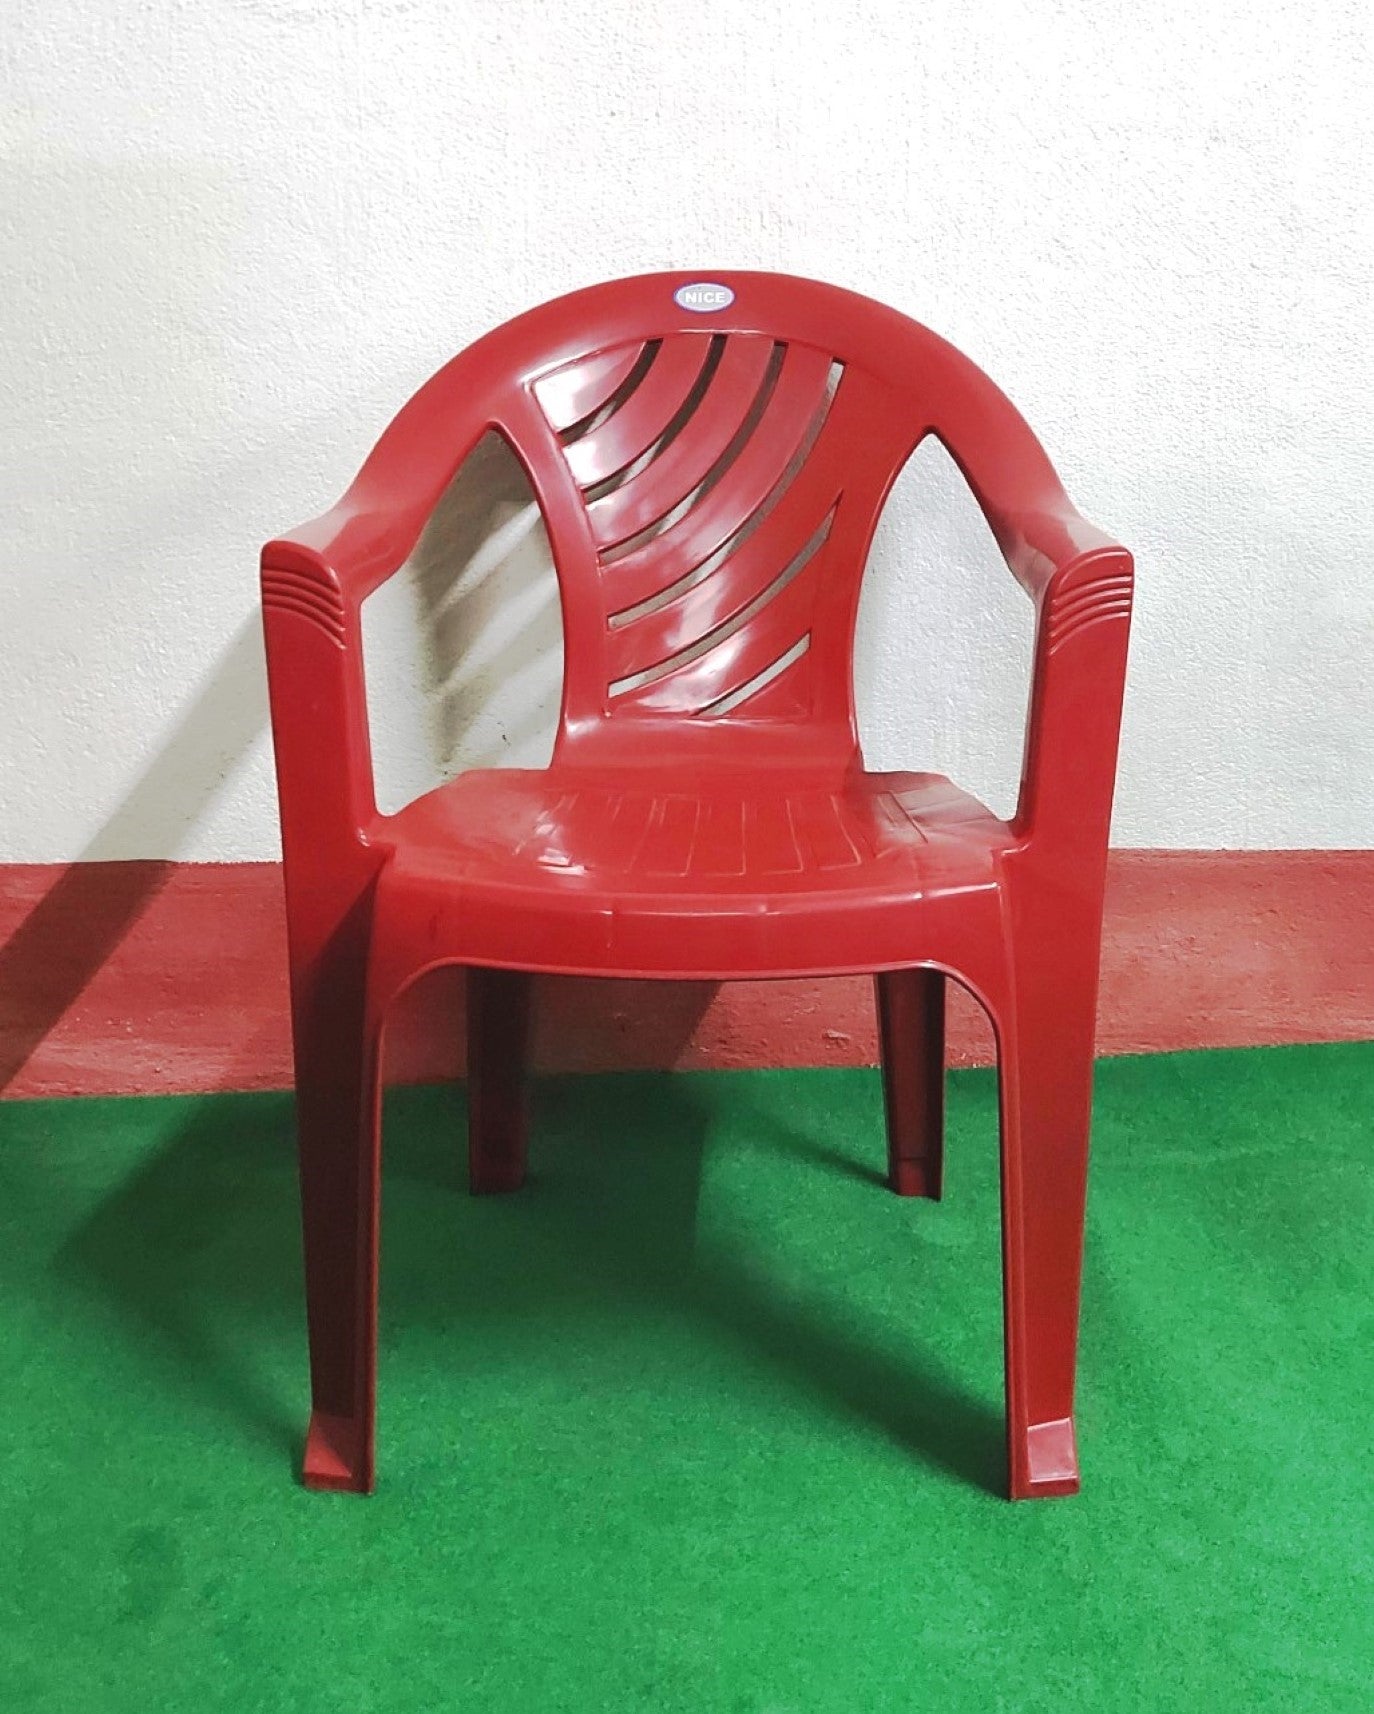 Bowzar Plastic Chair with Arm Red/Maroon